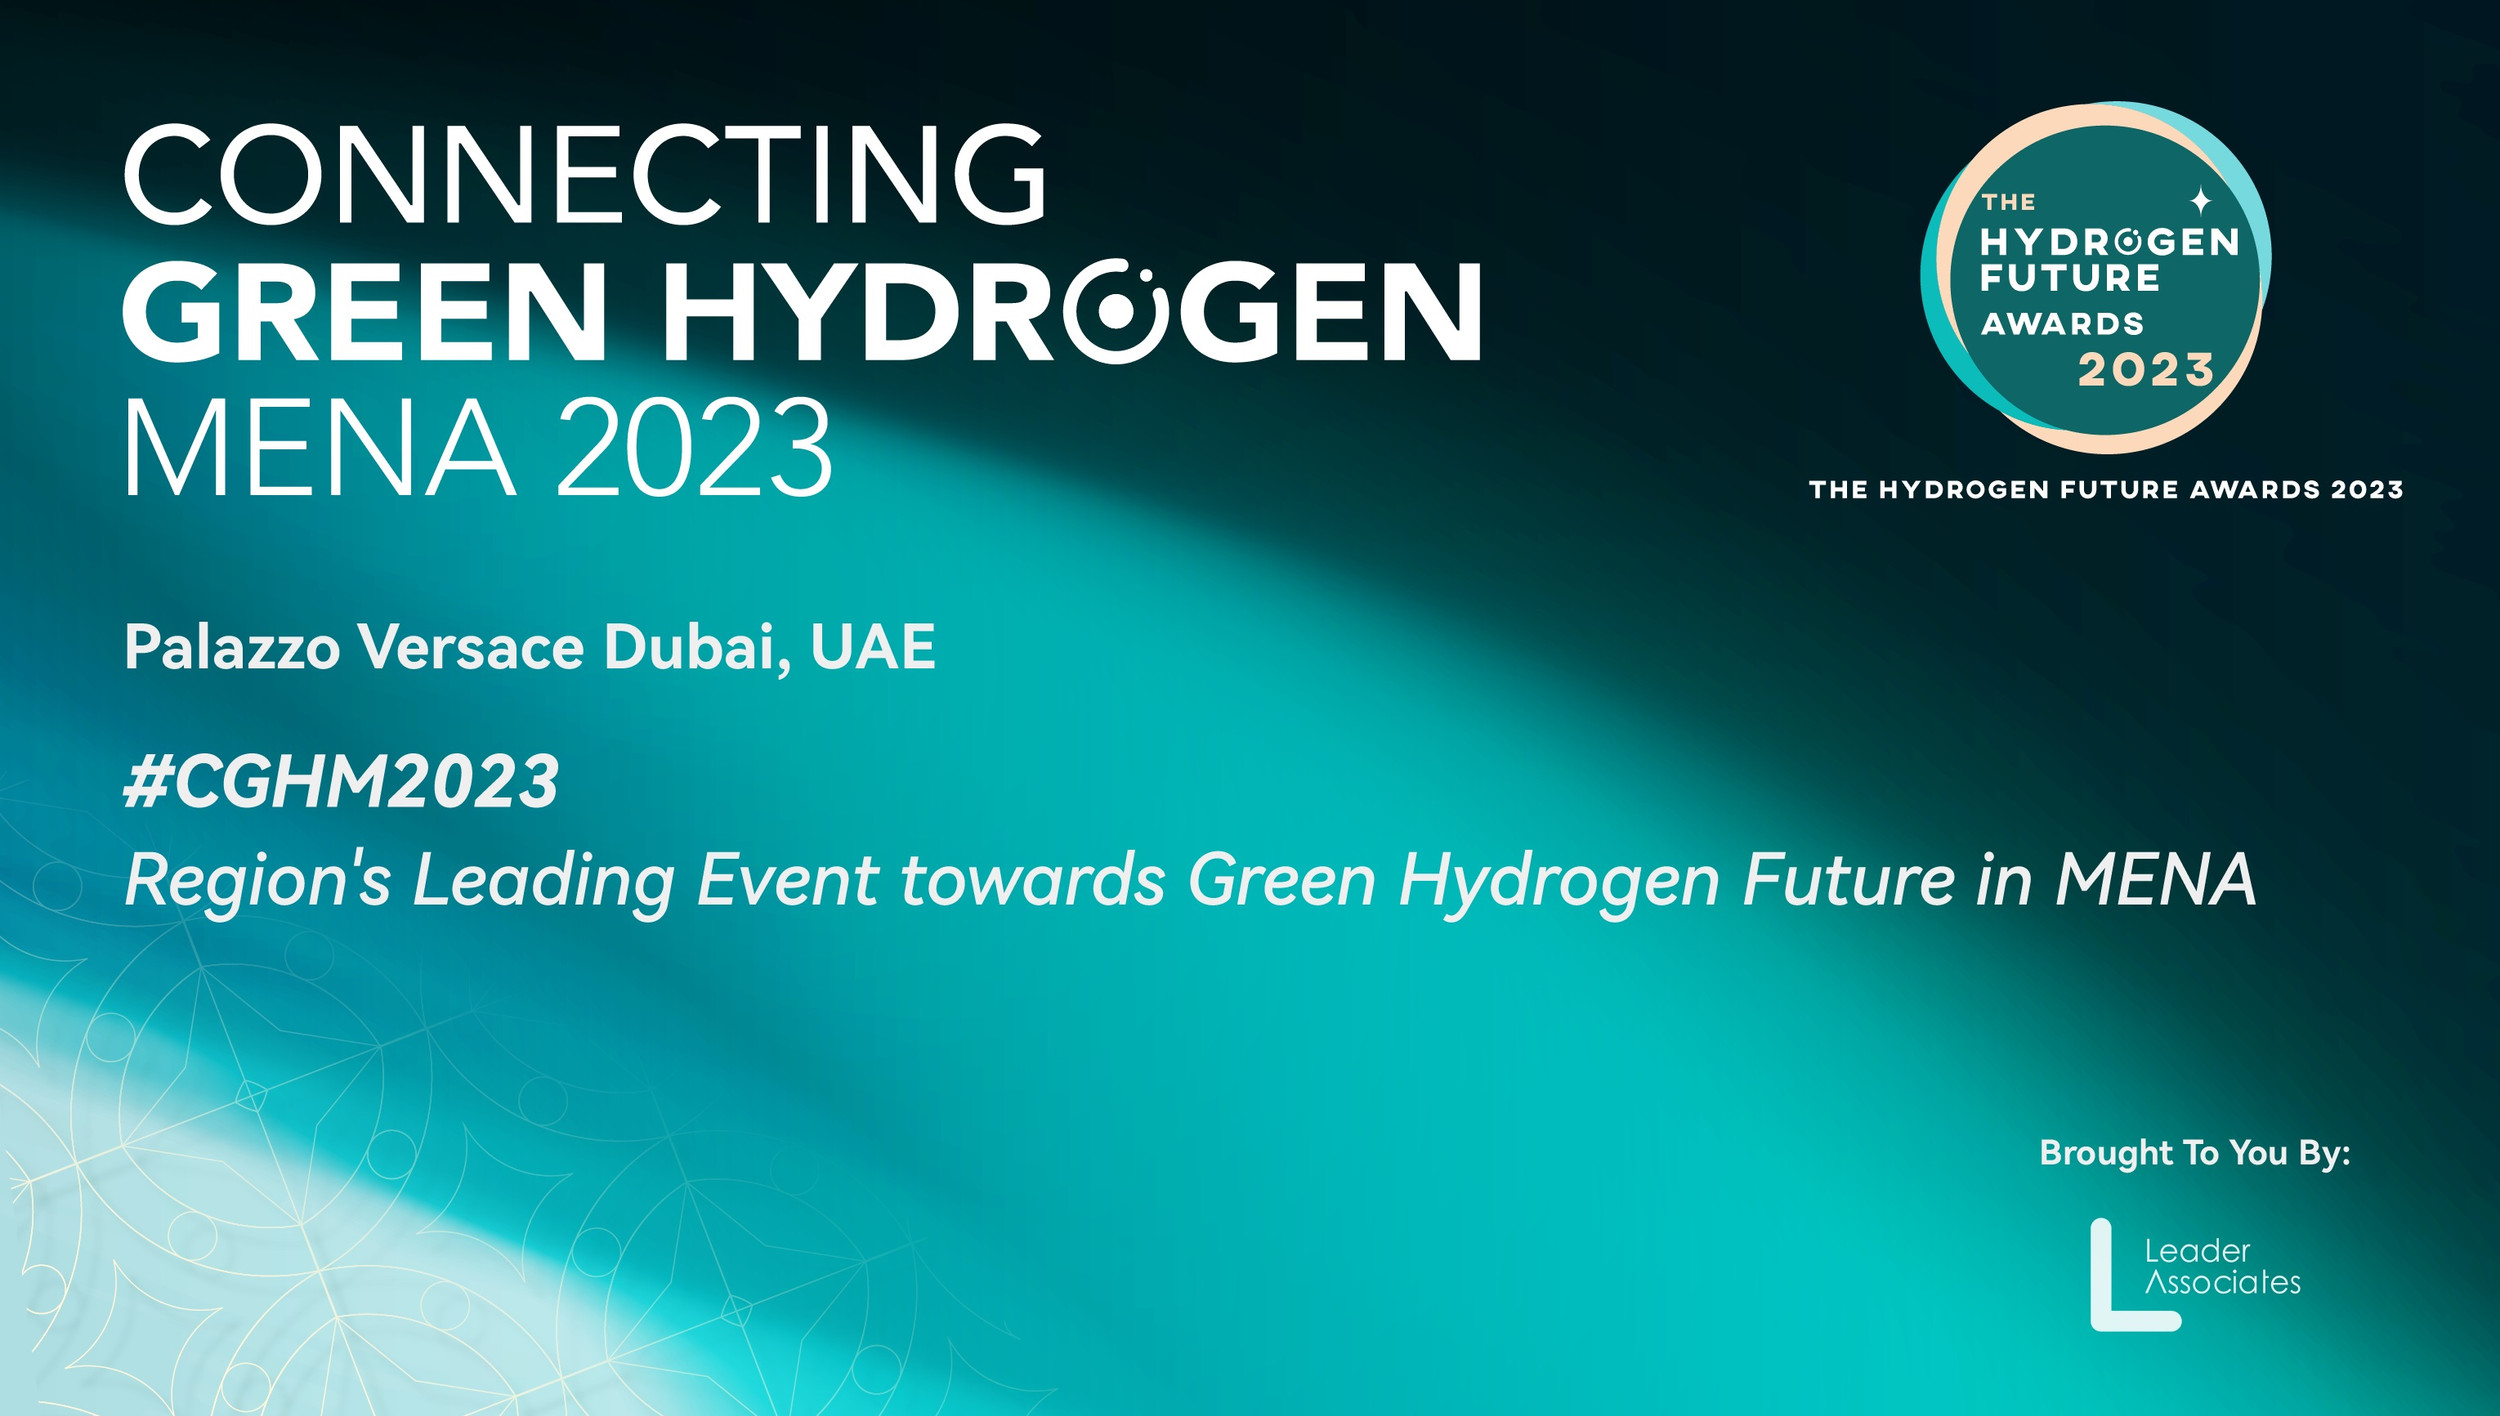 Build Hydrogen Connections at Connecting Green Hydrogen MENA 2023 Conference, Exhibition